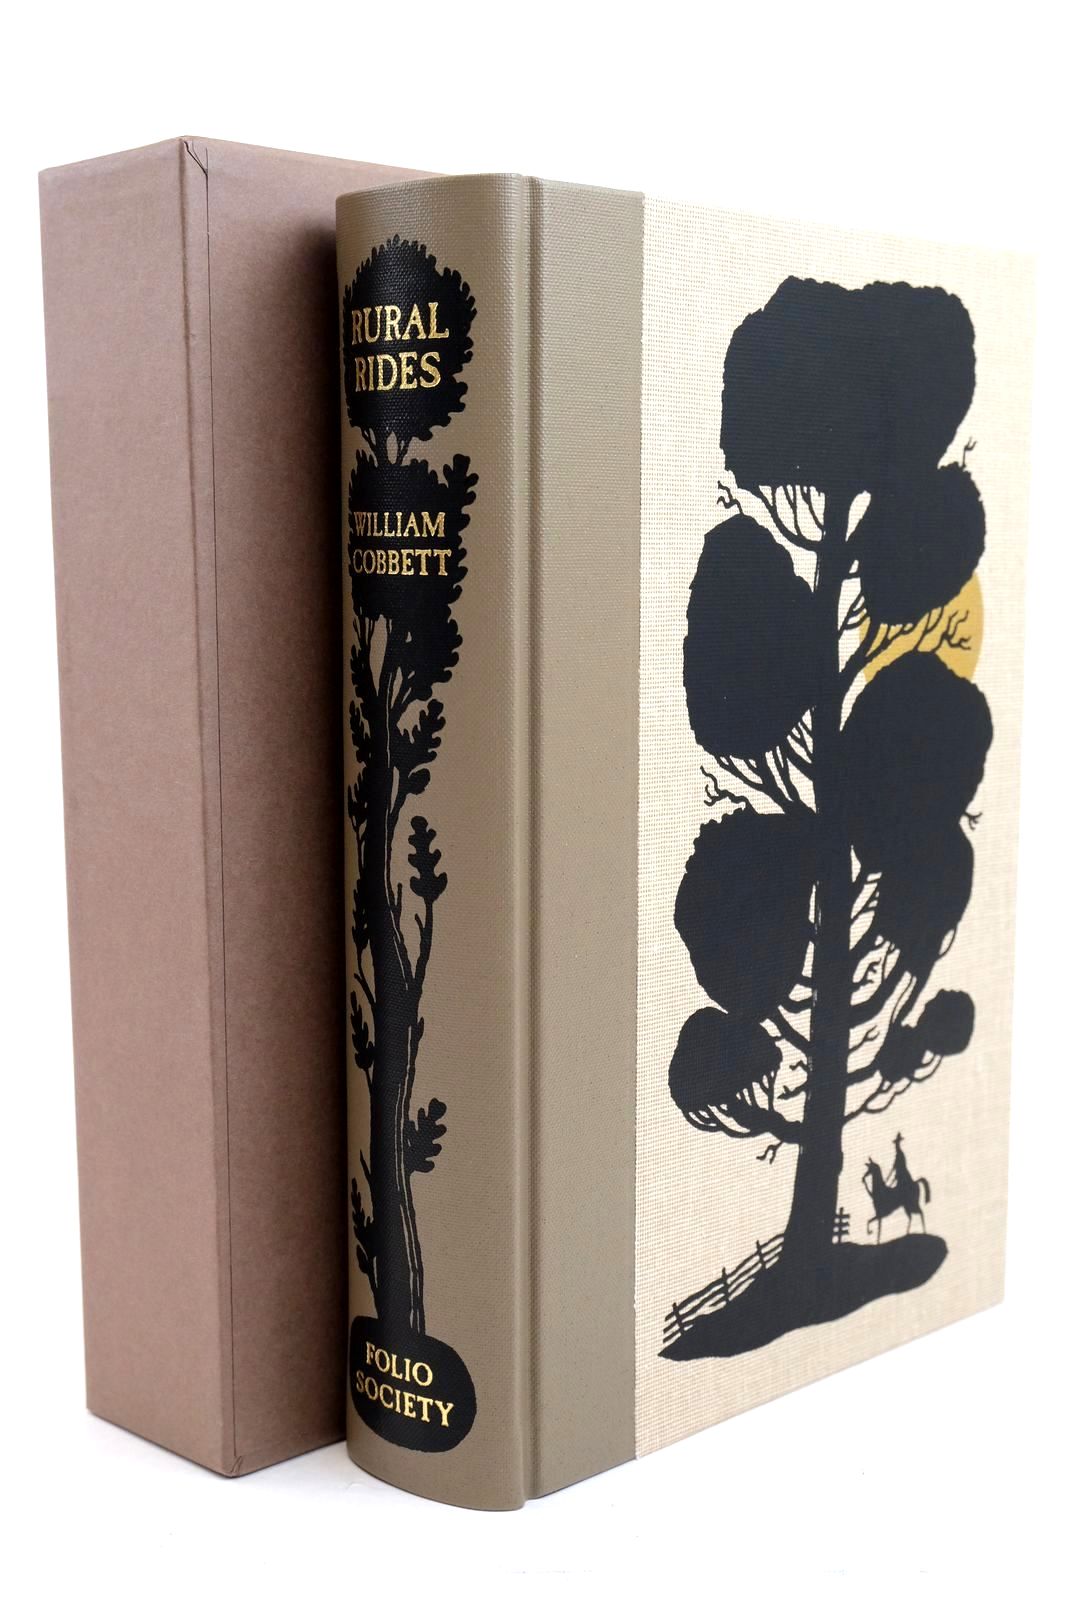 Photo of RURAL RIDES written by Cobbett, William illustrated by McLaren, Joe published by Folio Society (STOCK CODE: 1321027)  for sale by Stella & Rose's Books